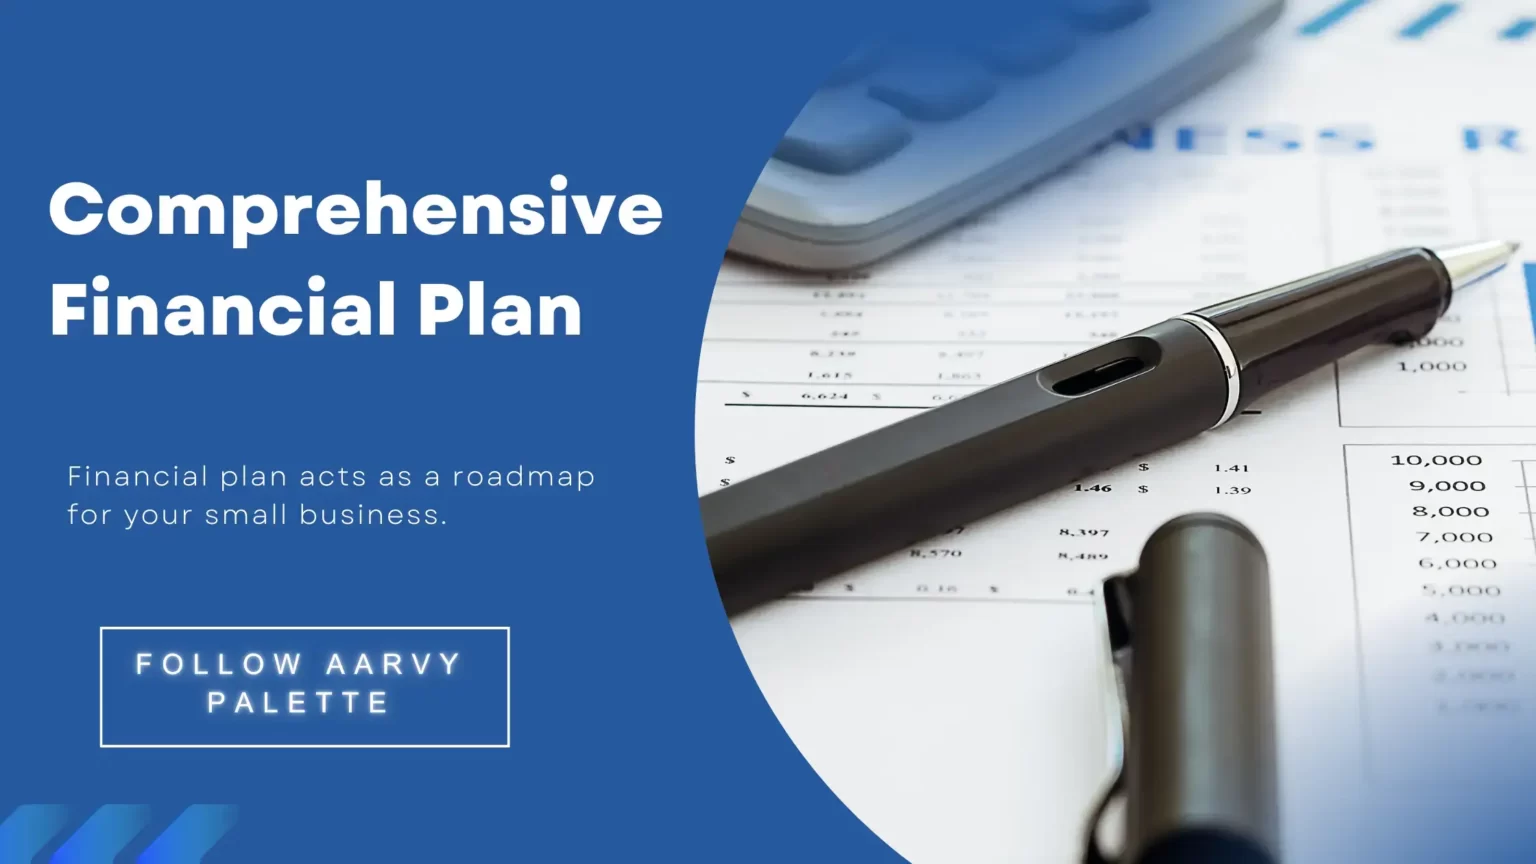 Financial plan for small businesses!